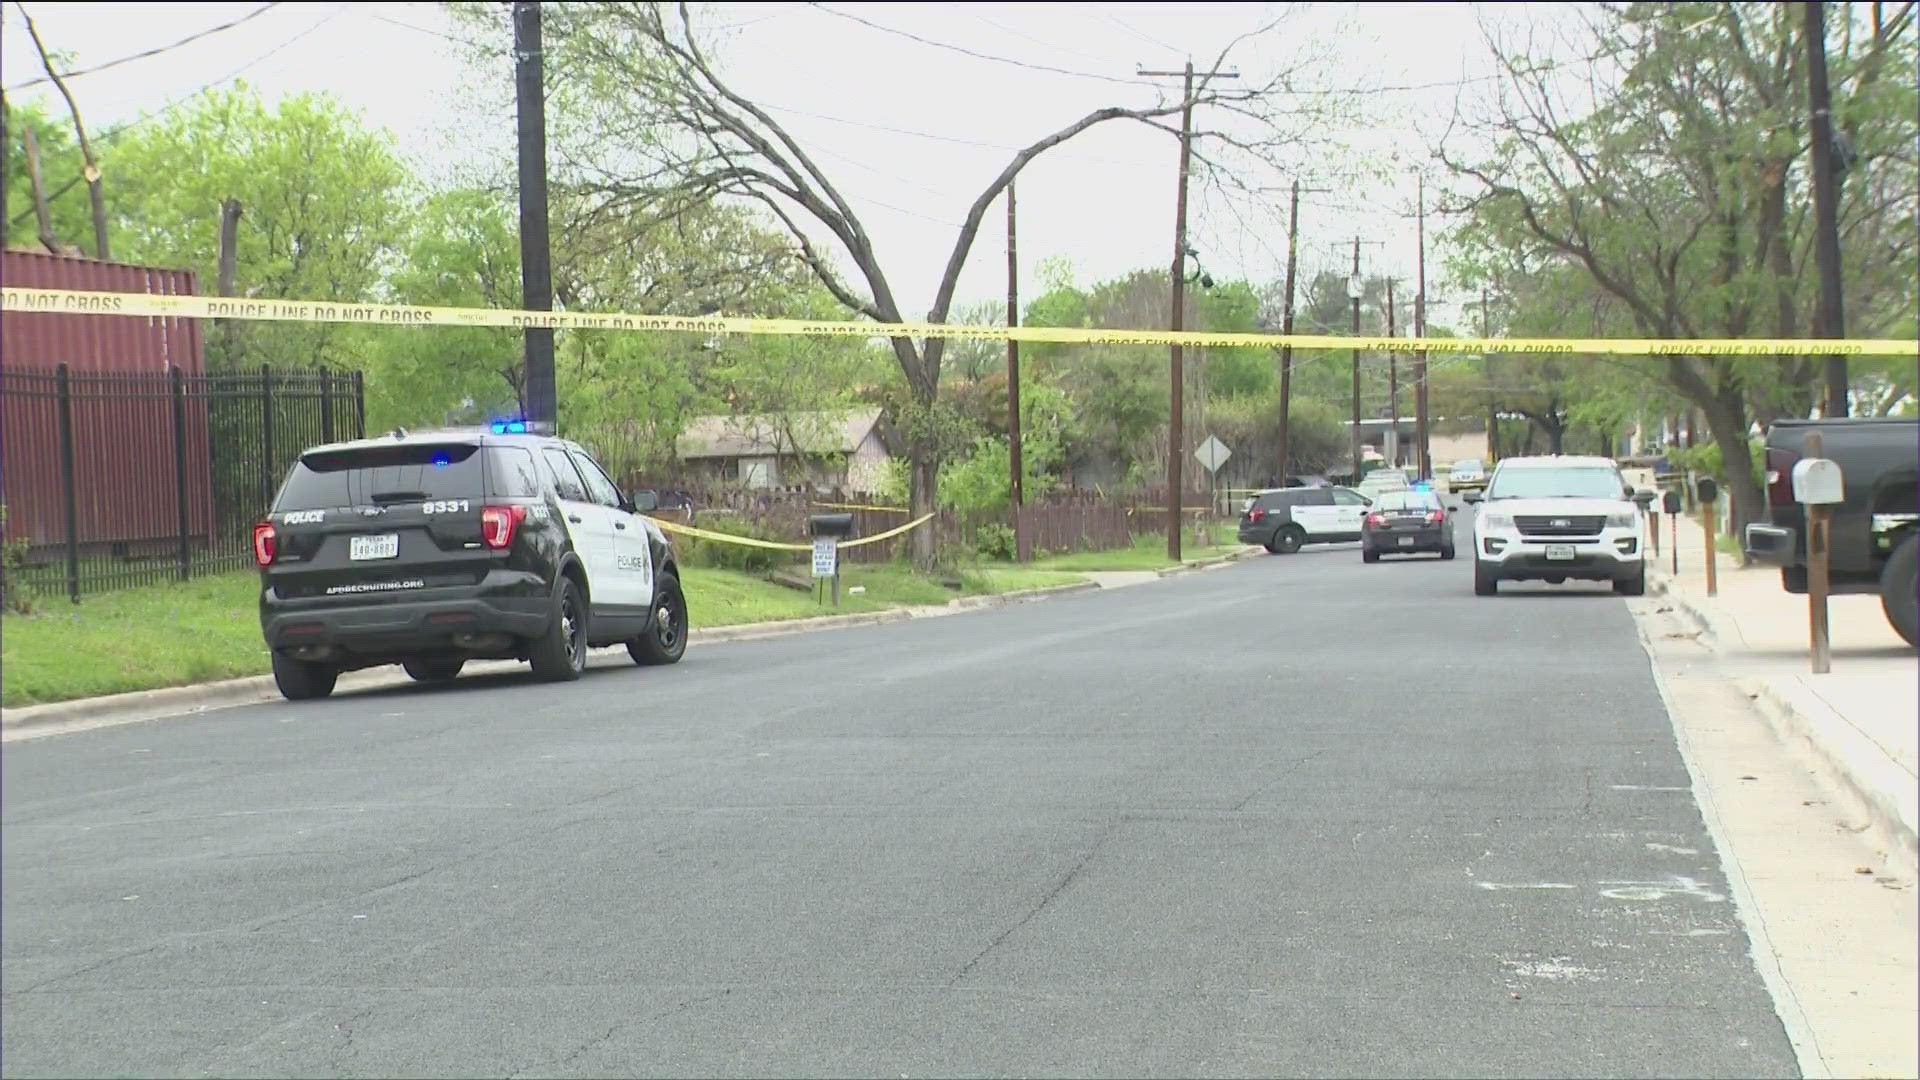 The Austin Police Department responded to multiple calls about gunshots just after 7 a.m.